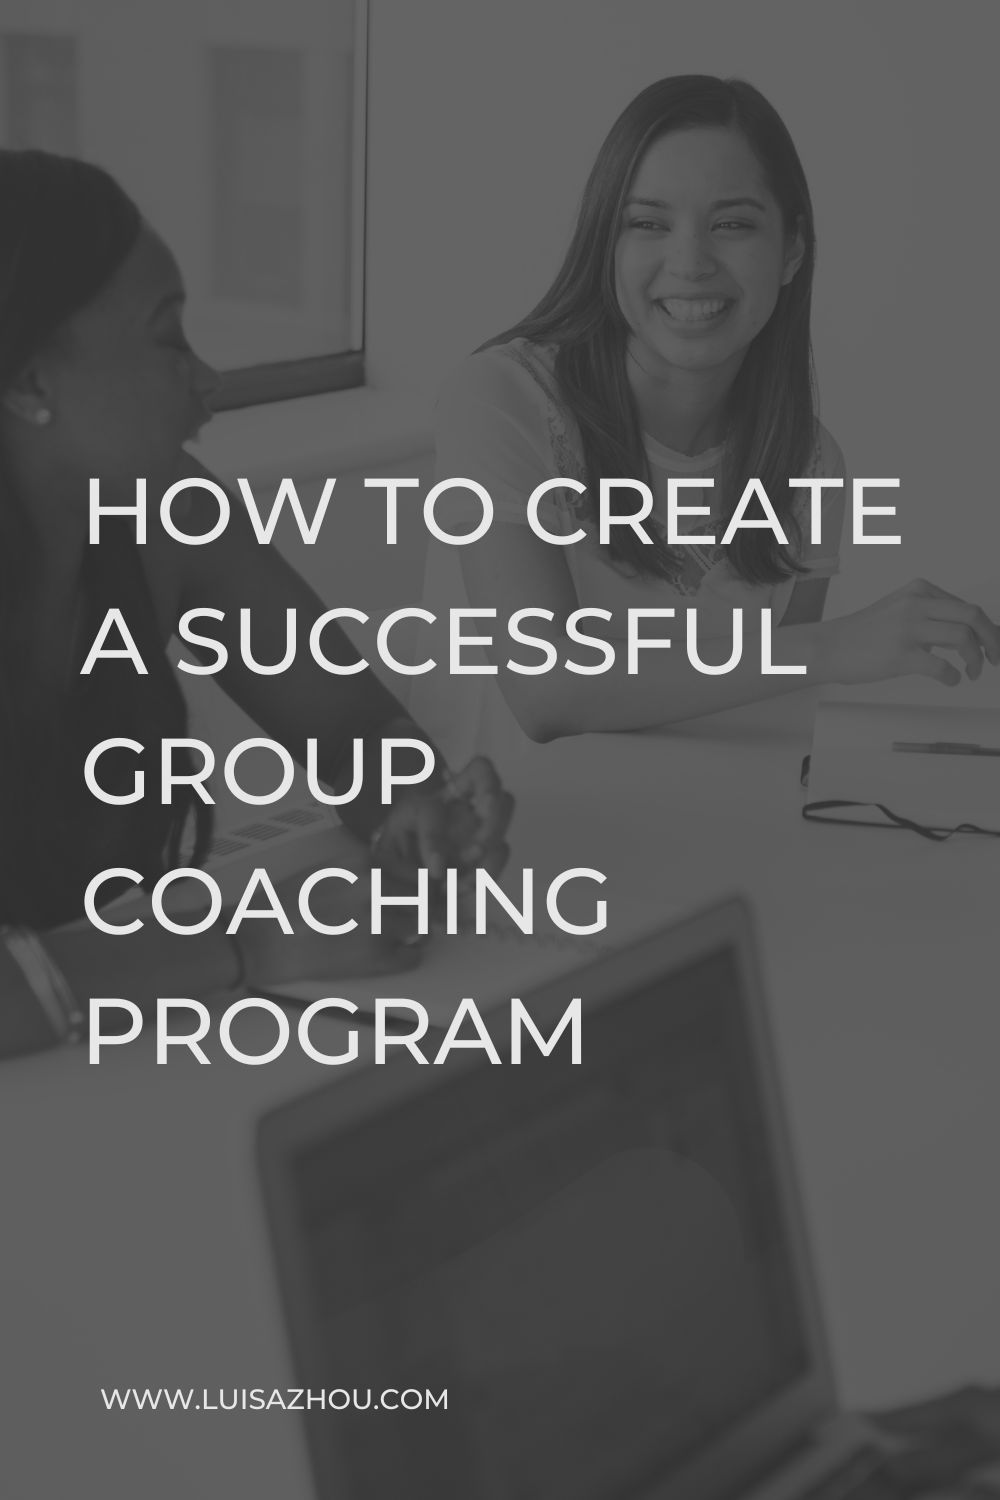 How to Create a Successful Group Coaching Program pin